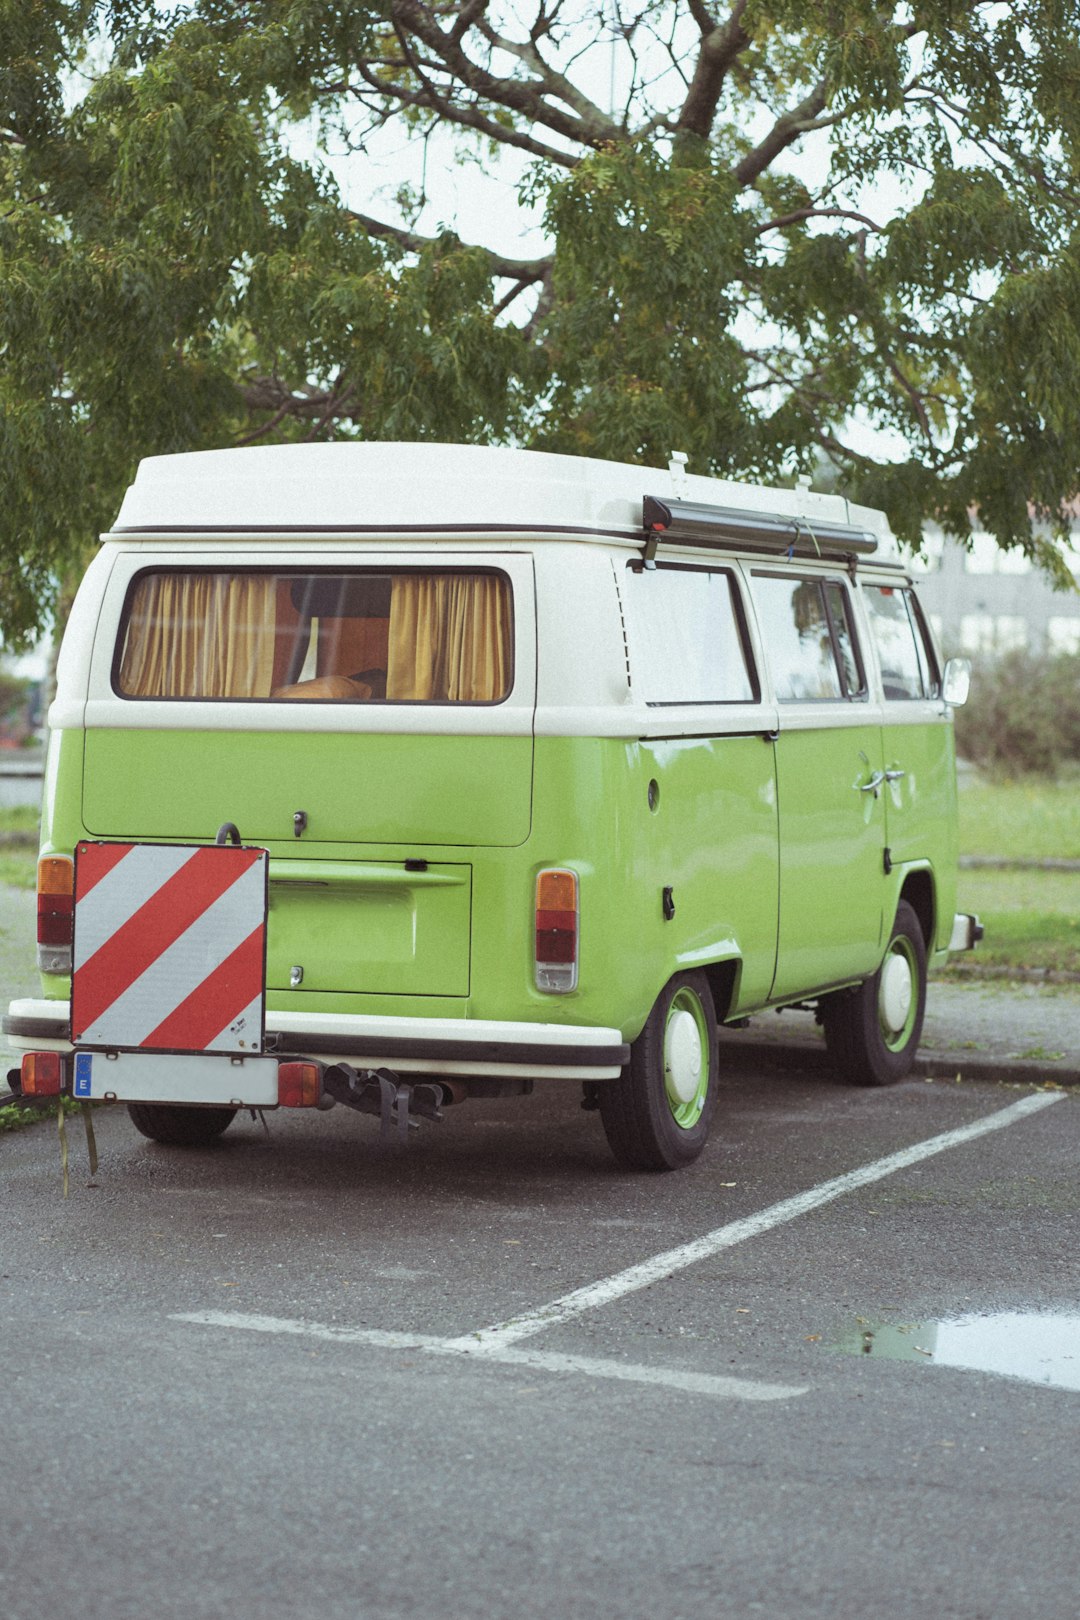 green and white volkswagen t-2 parked on gray asphalt road during daytime